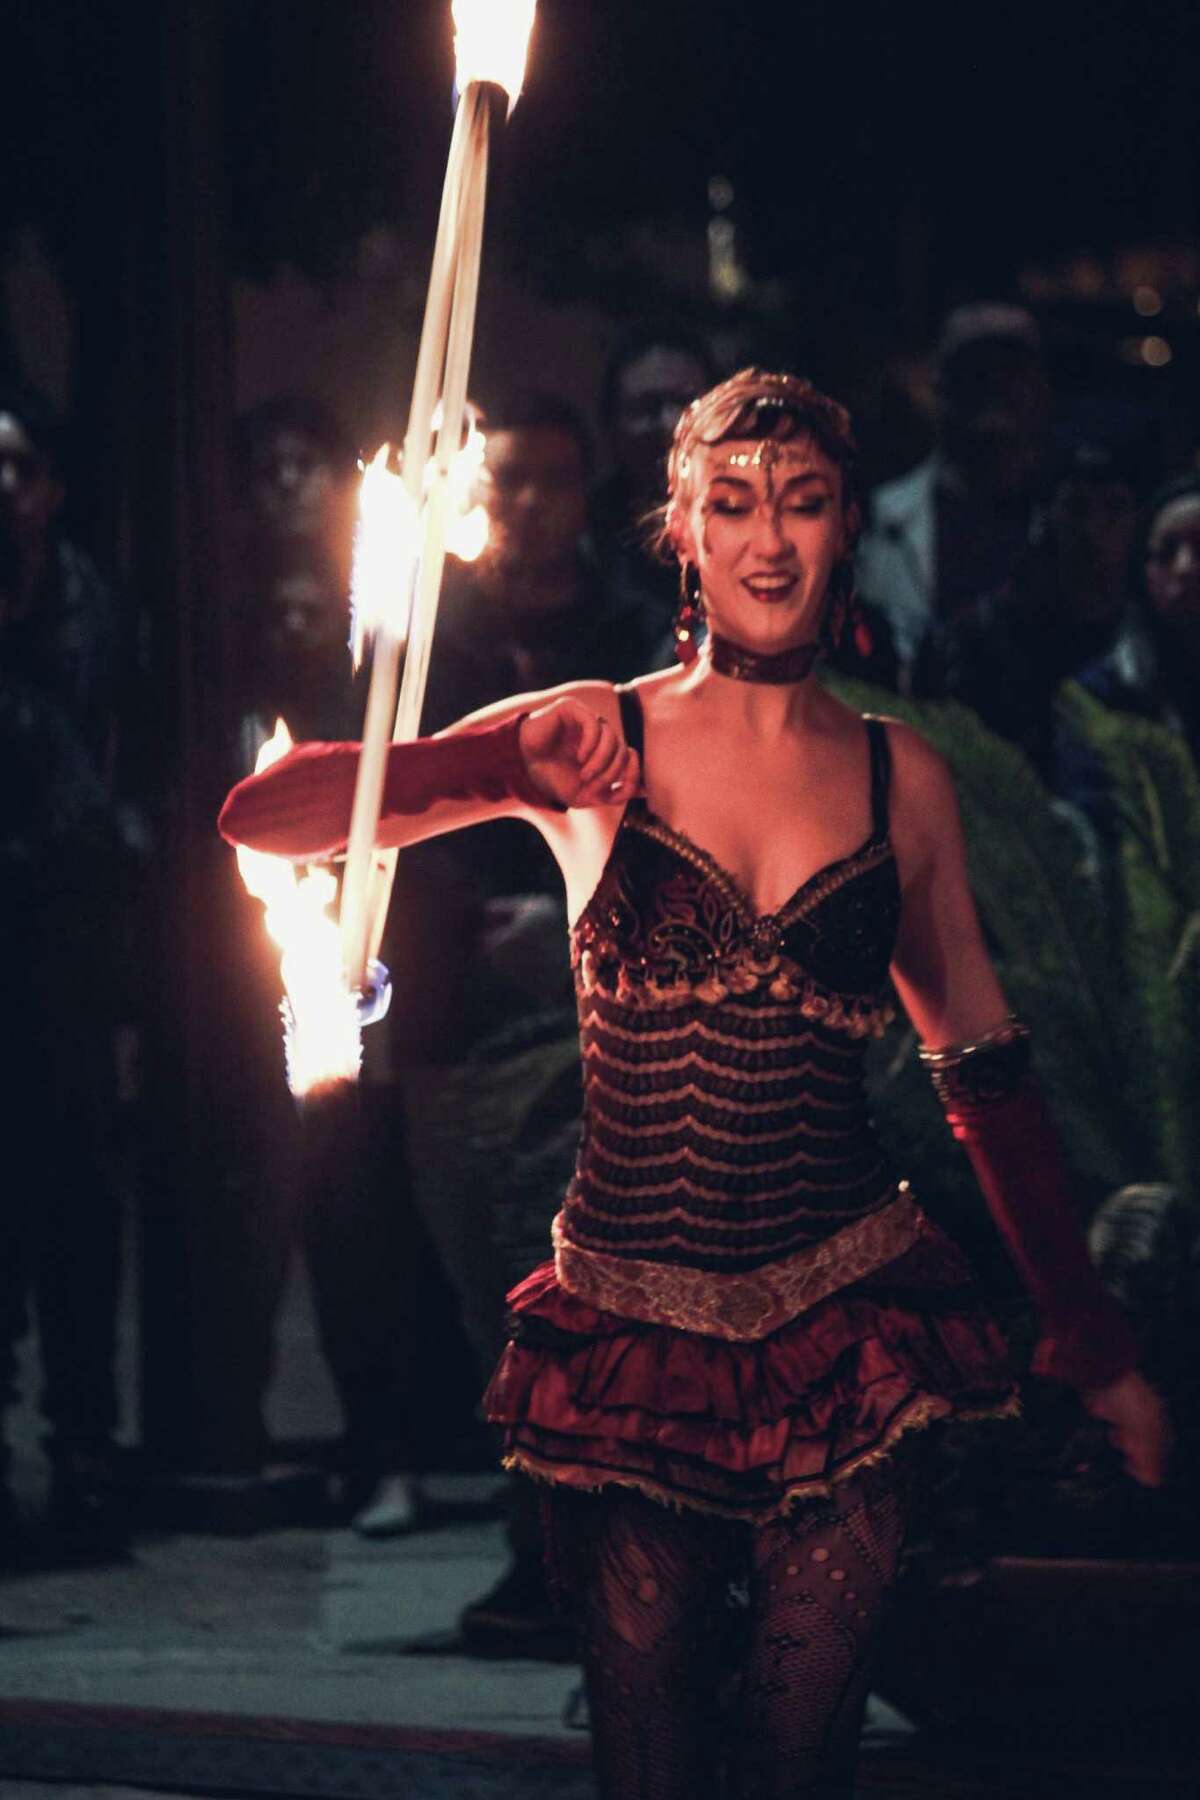 Geekdom, San Antonio’s downtown co-working space for all things tech, took its fourth birthday celebration citywide with a fire-eating, sword-swallowing Main Plaza bash on Dec. 4, 2015.